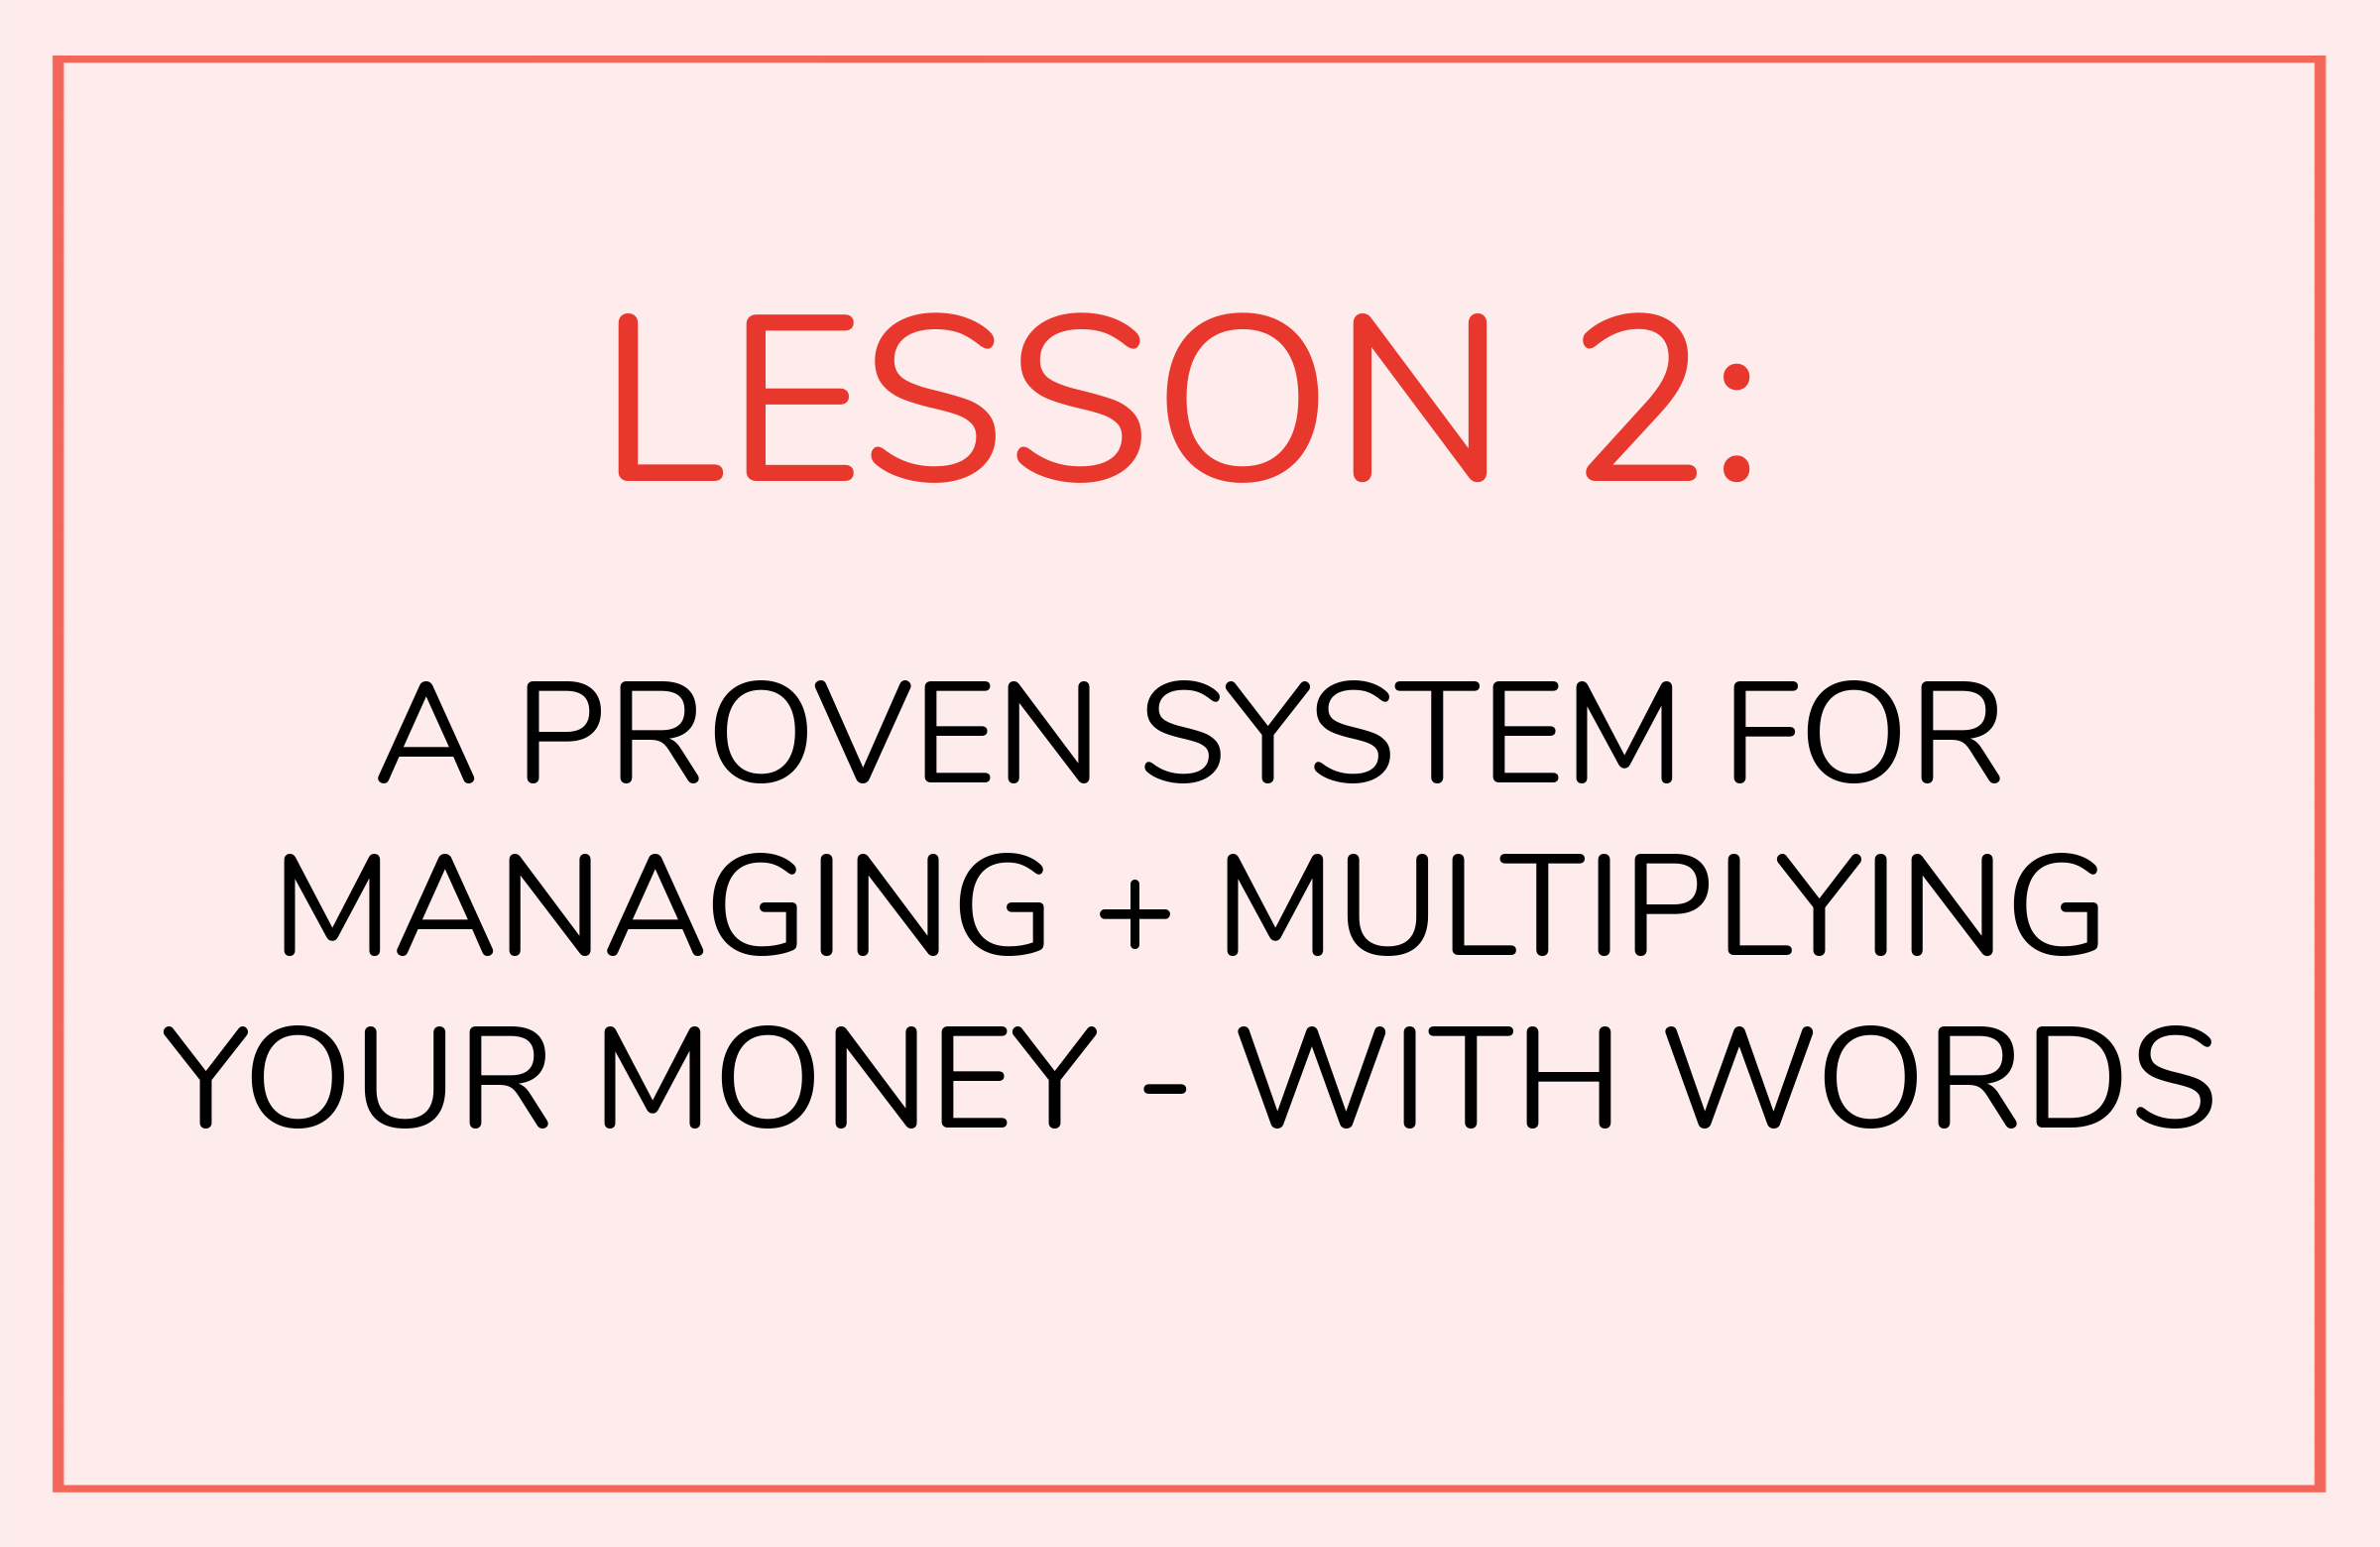 LESSON 2: A Proven System for Managing + Multiplying Your Money - With Words